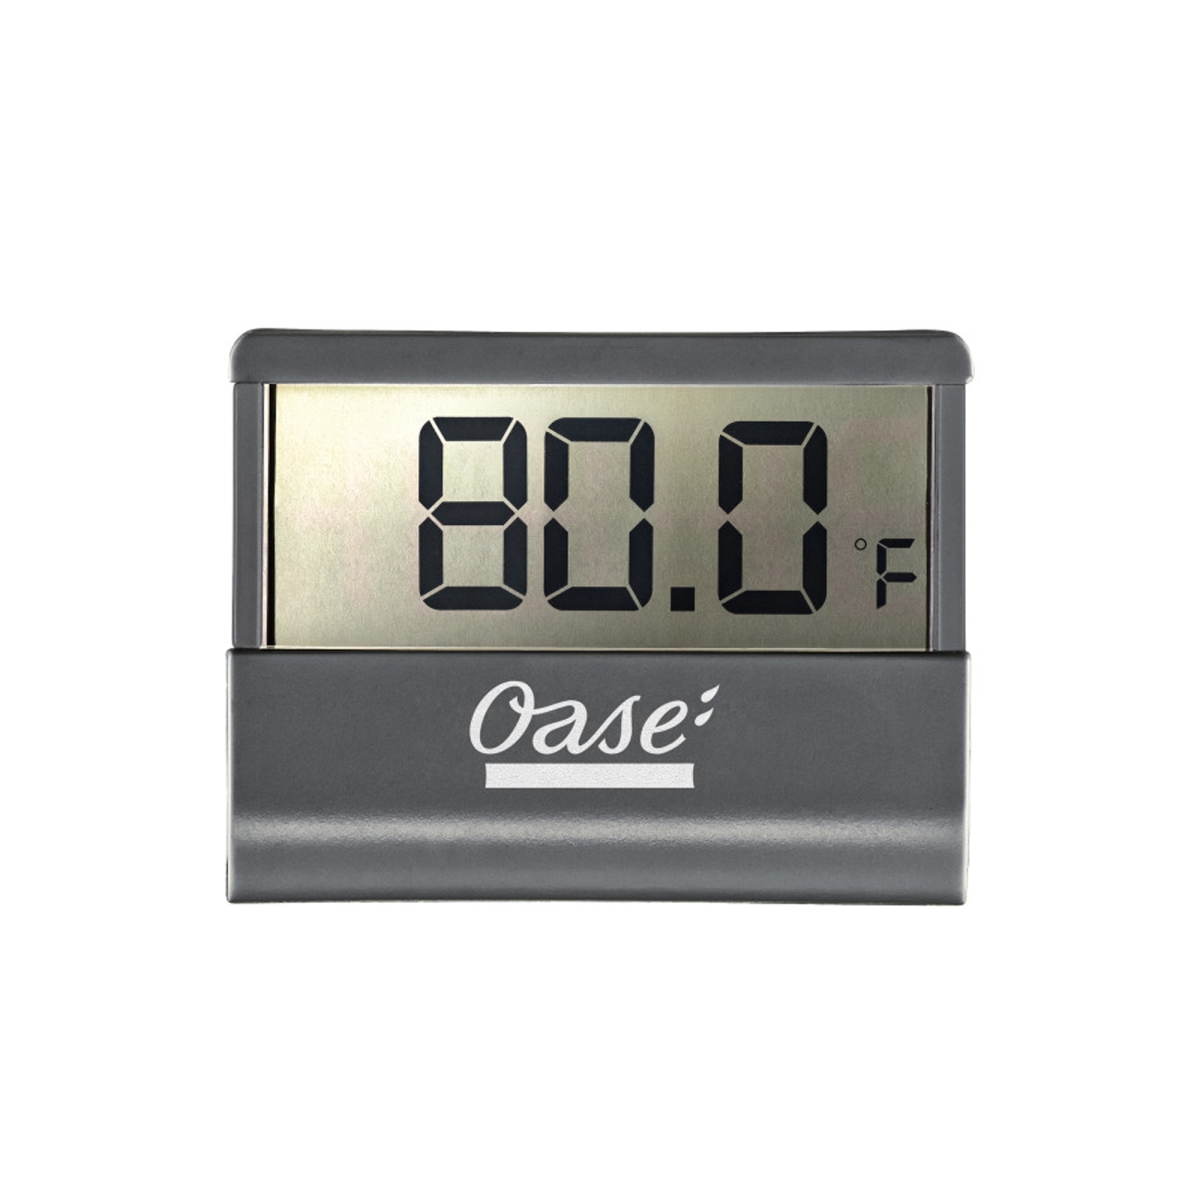 Picture of Oase 706759484923 Digital Thermometer for Aquarium - 2.4 x 0.7 x 1.9 in.